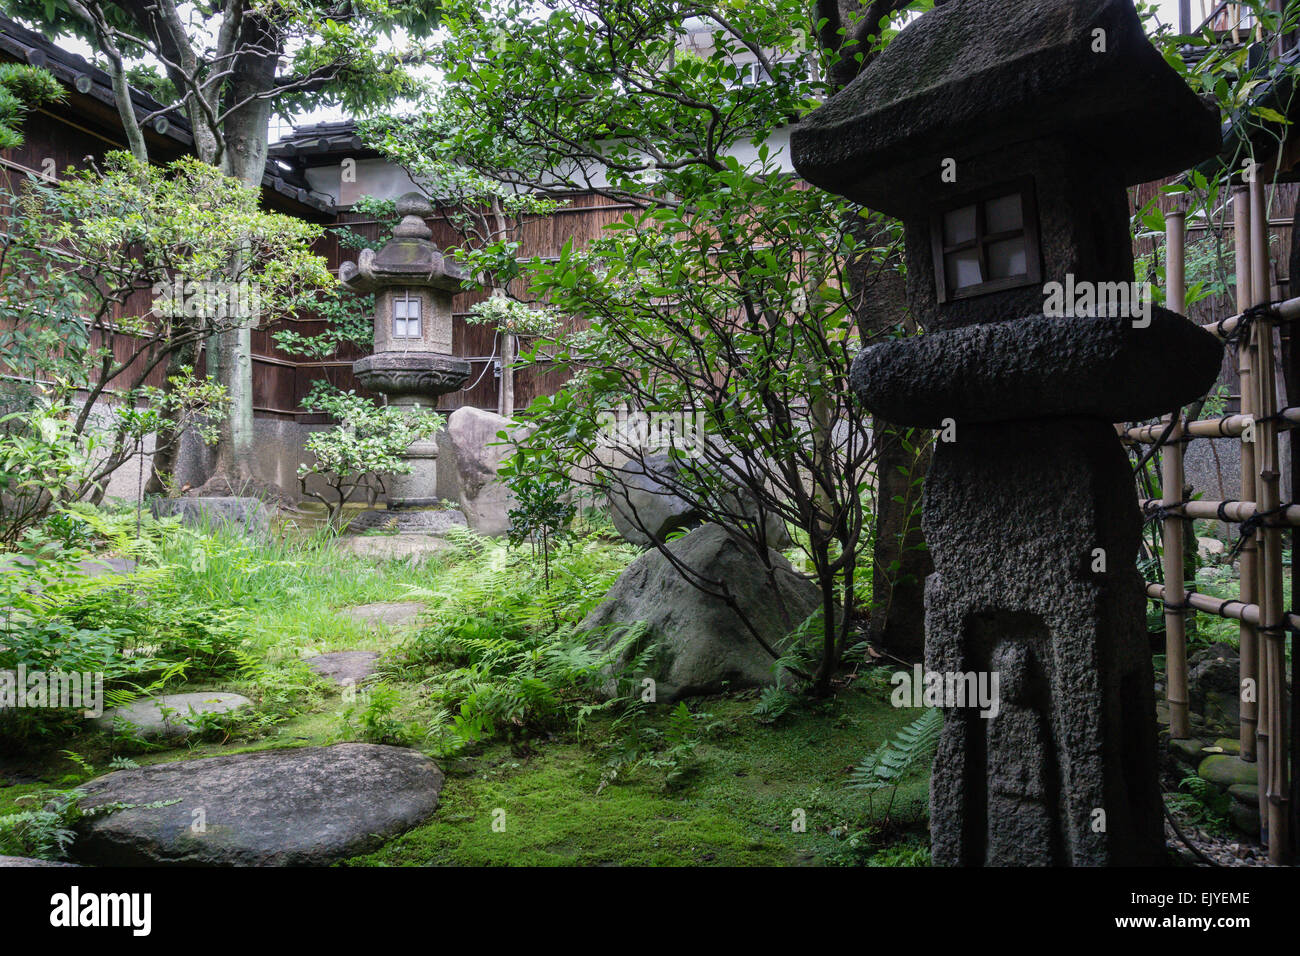 View of a traditional Japanese garden with old lantern in Kyoto, Japan Stock Photo